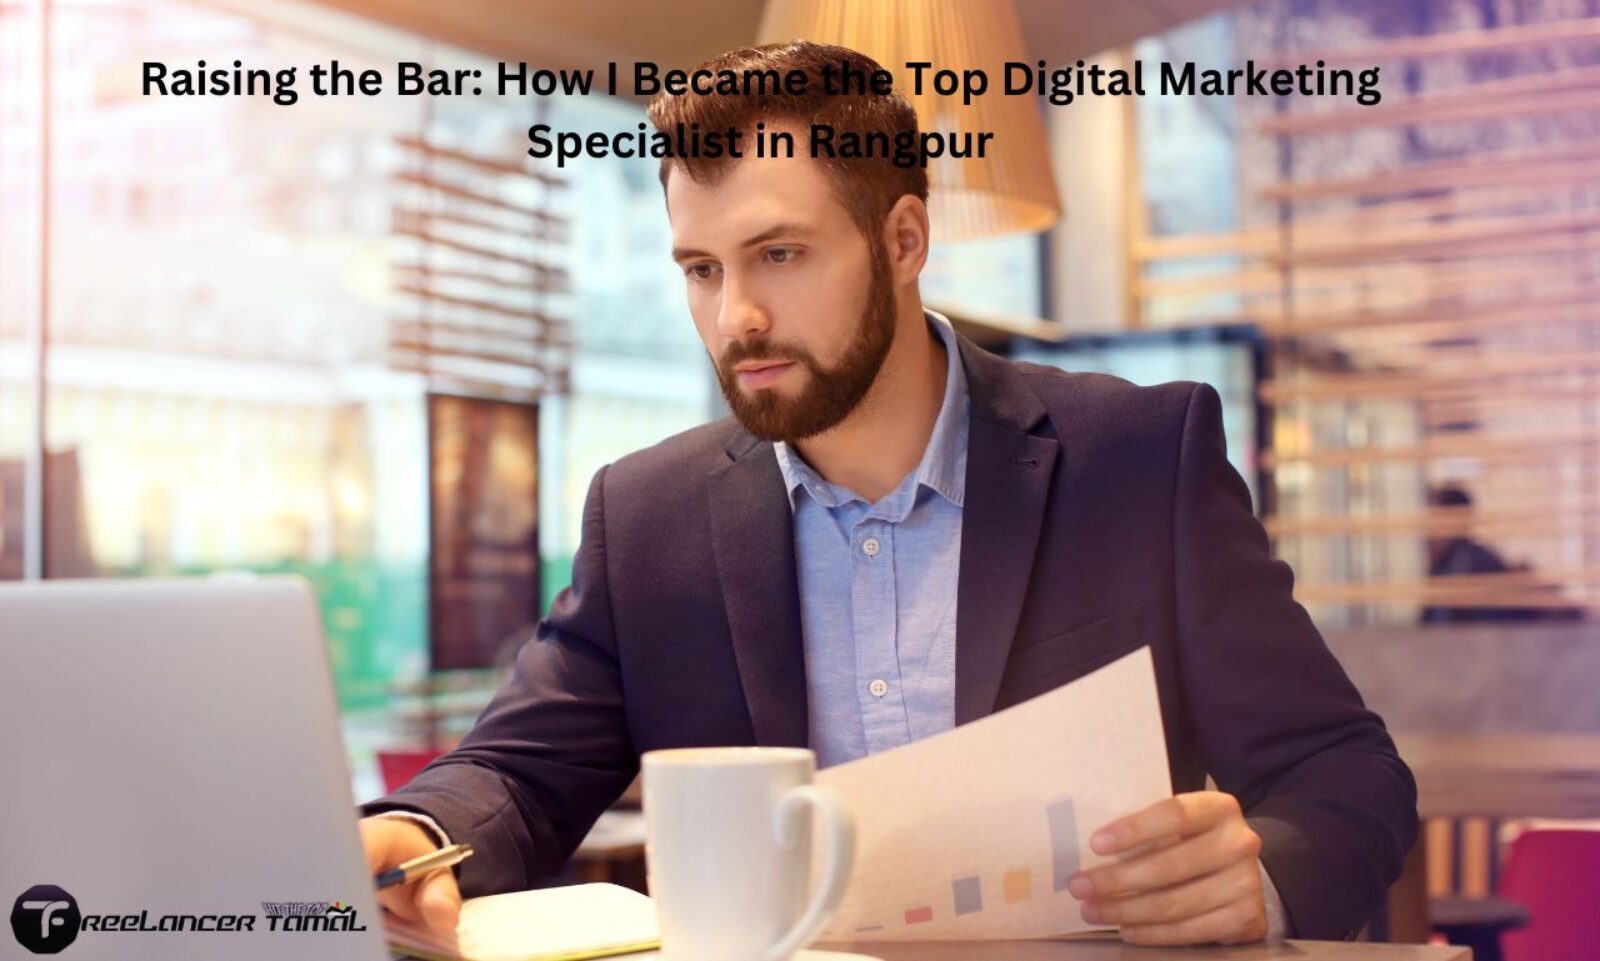 Raising the Bar: How I Became the Top Digital Marketing Specialist in Rangpur